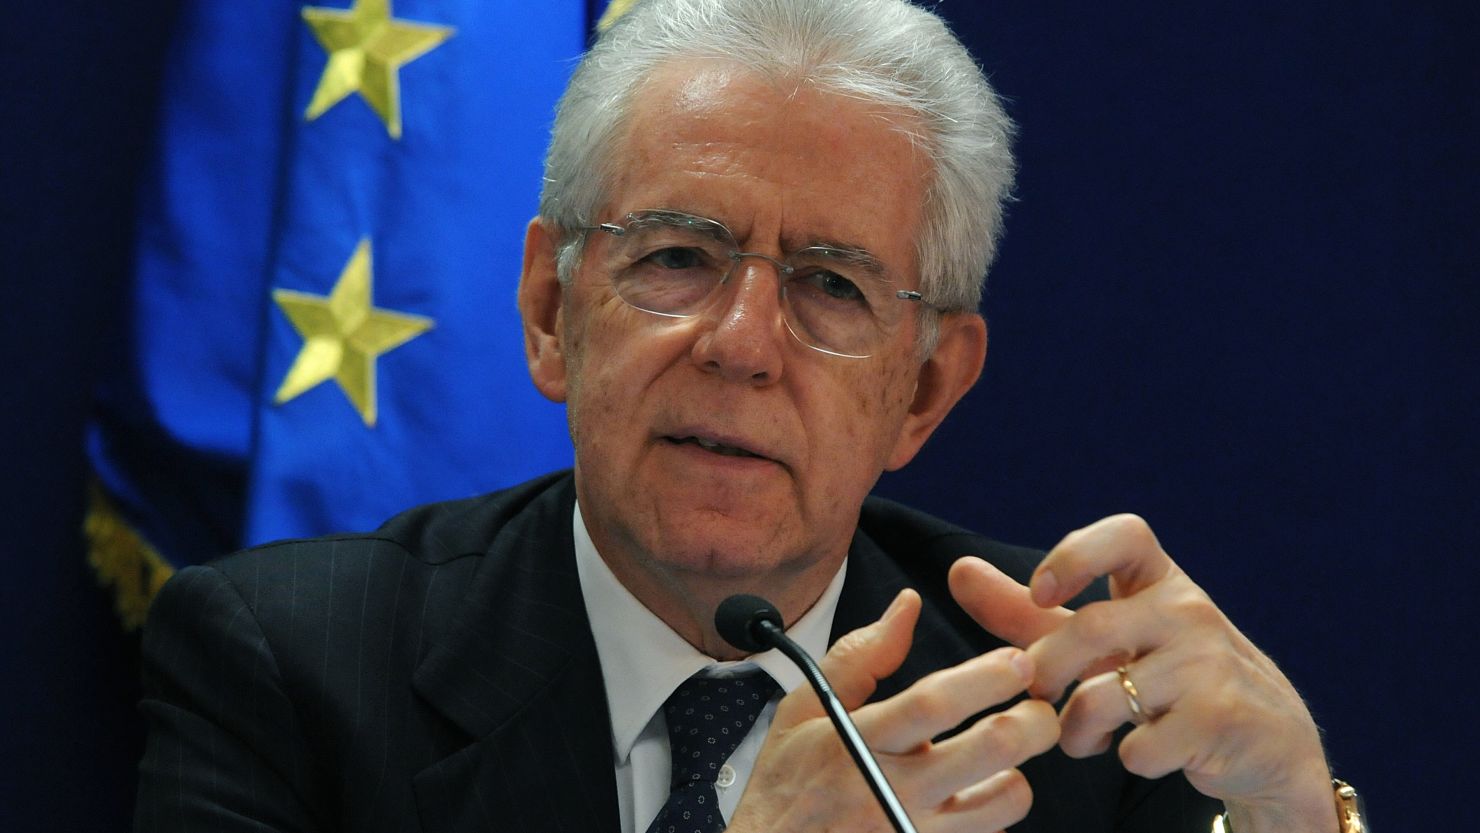 (File photo) Italian Prime Minister Mario Monti speaks in Brussels early May 24 2012.